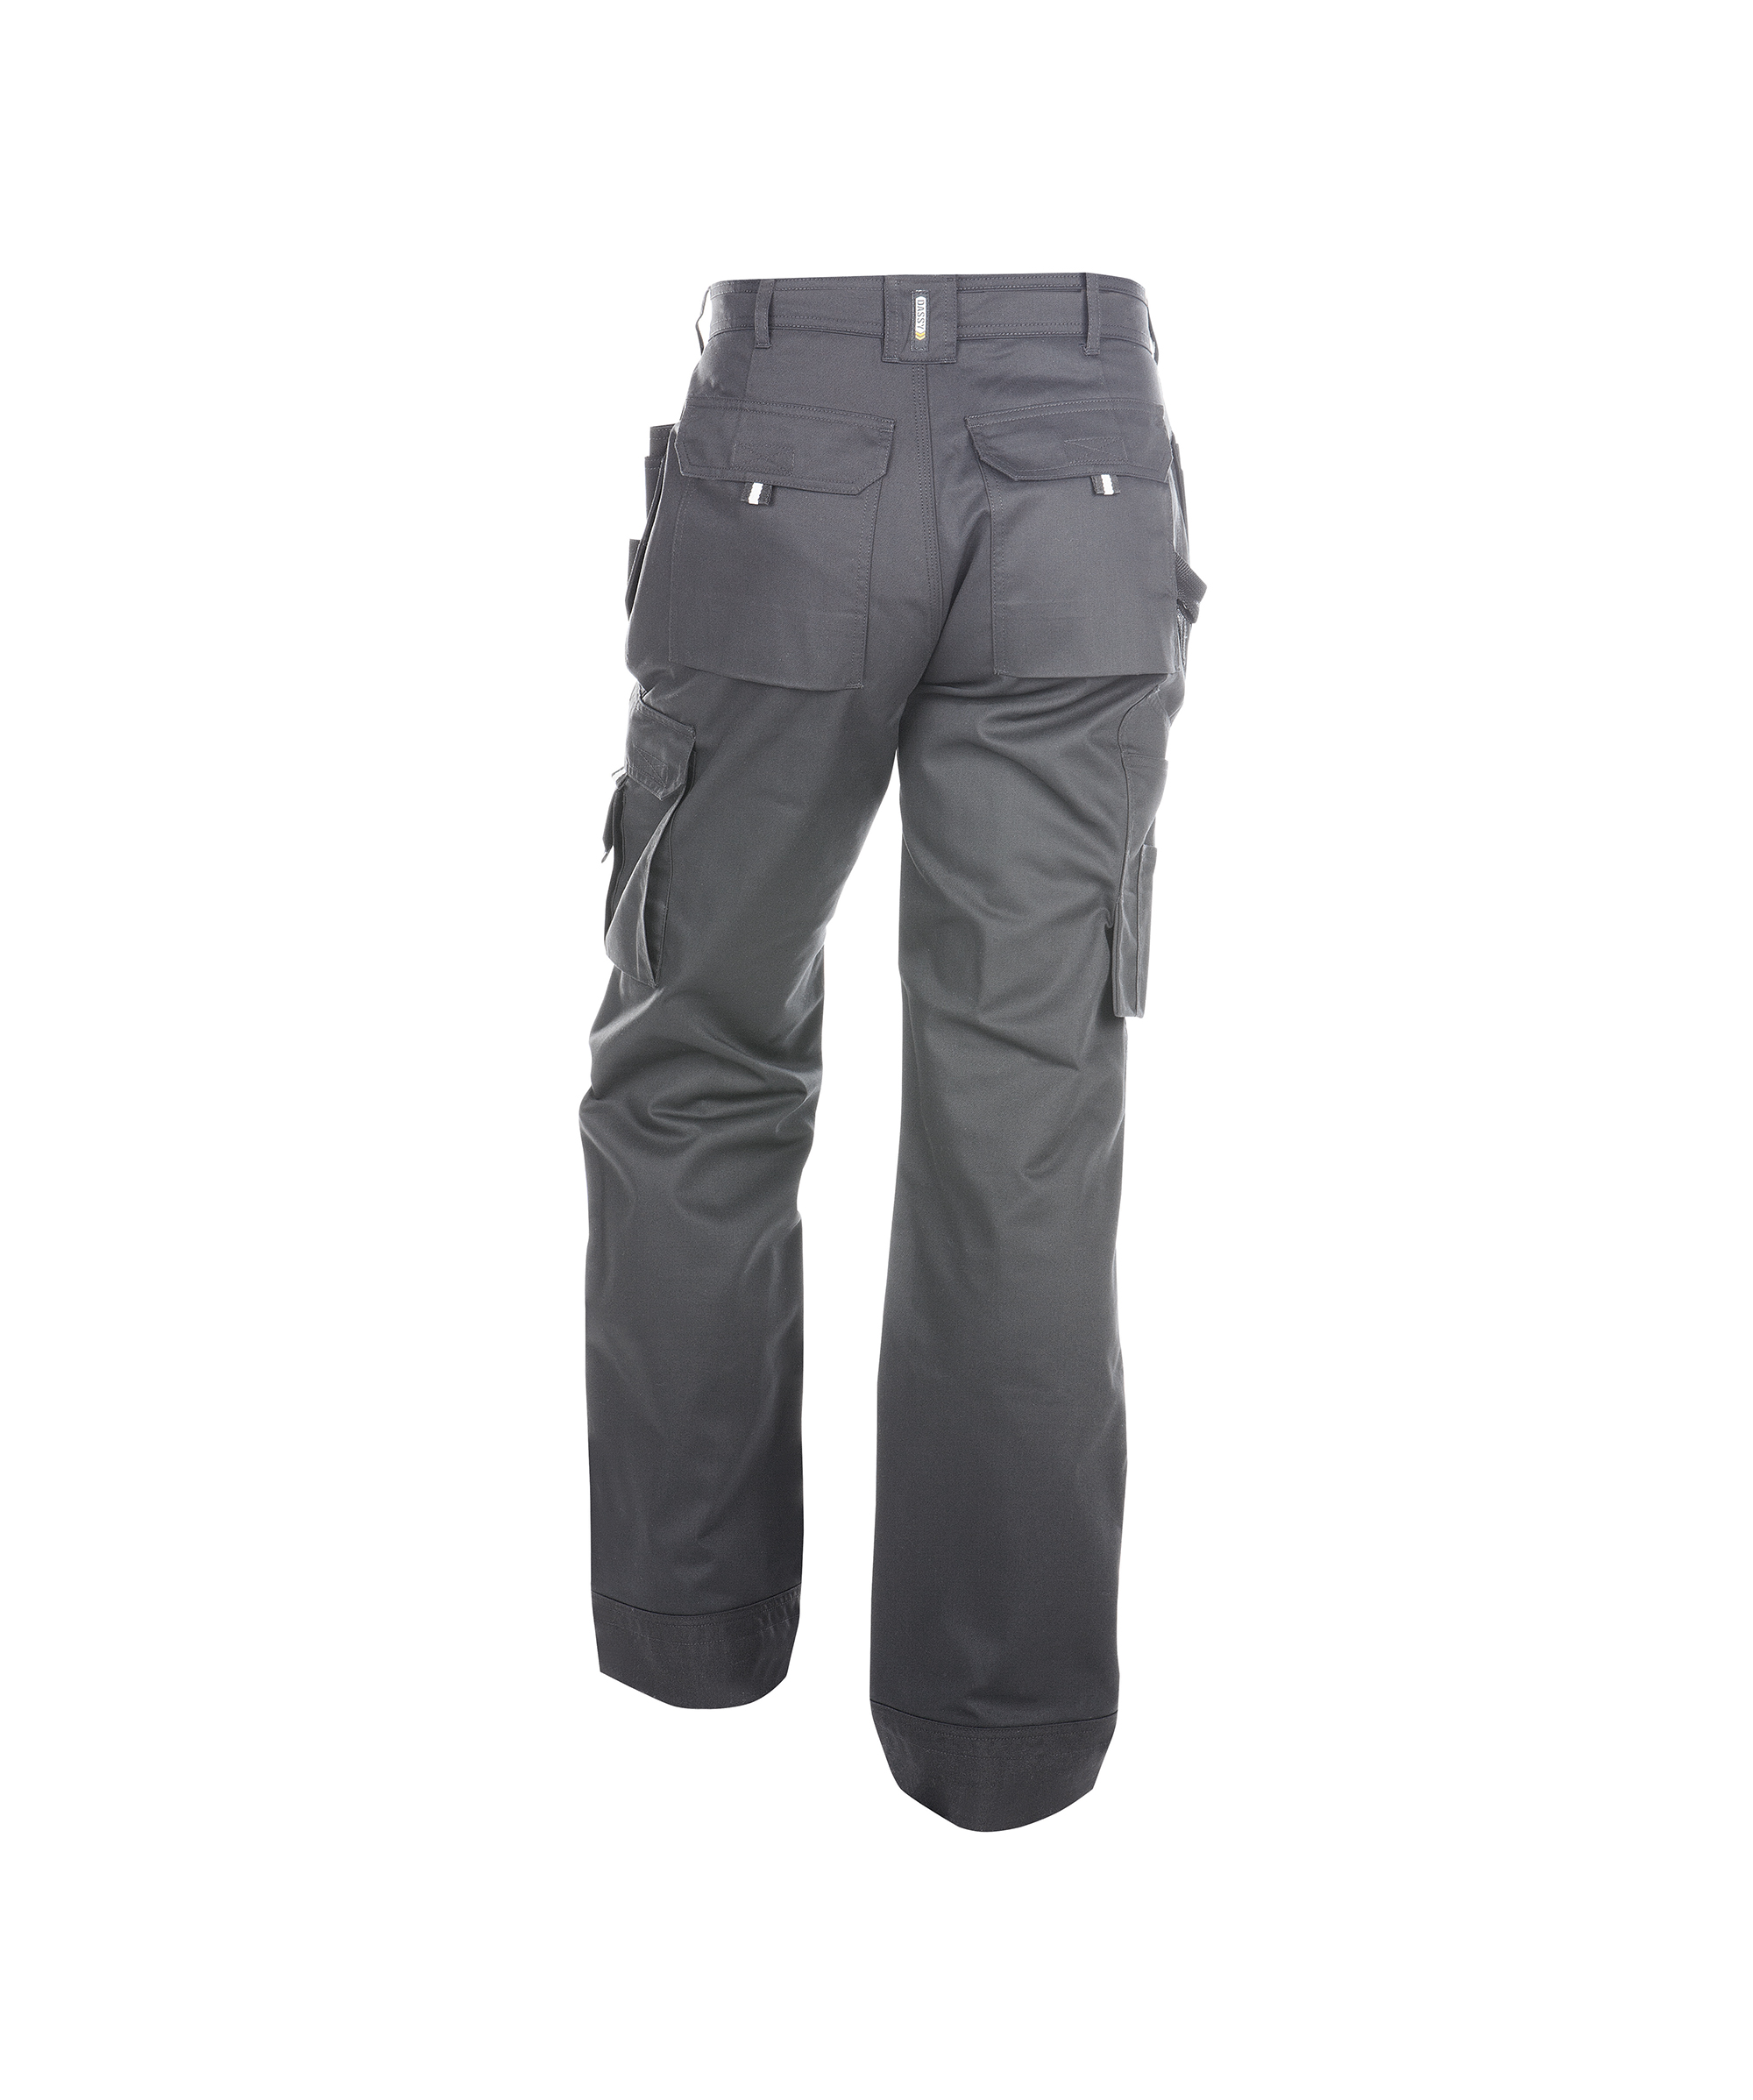 oxford_work-trousers-with-multi-pockets-and-knee-pockets_cement-grey_back.jpg